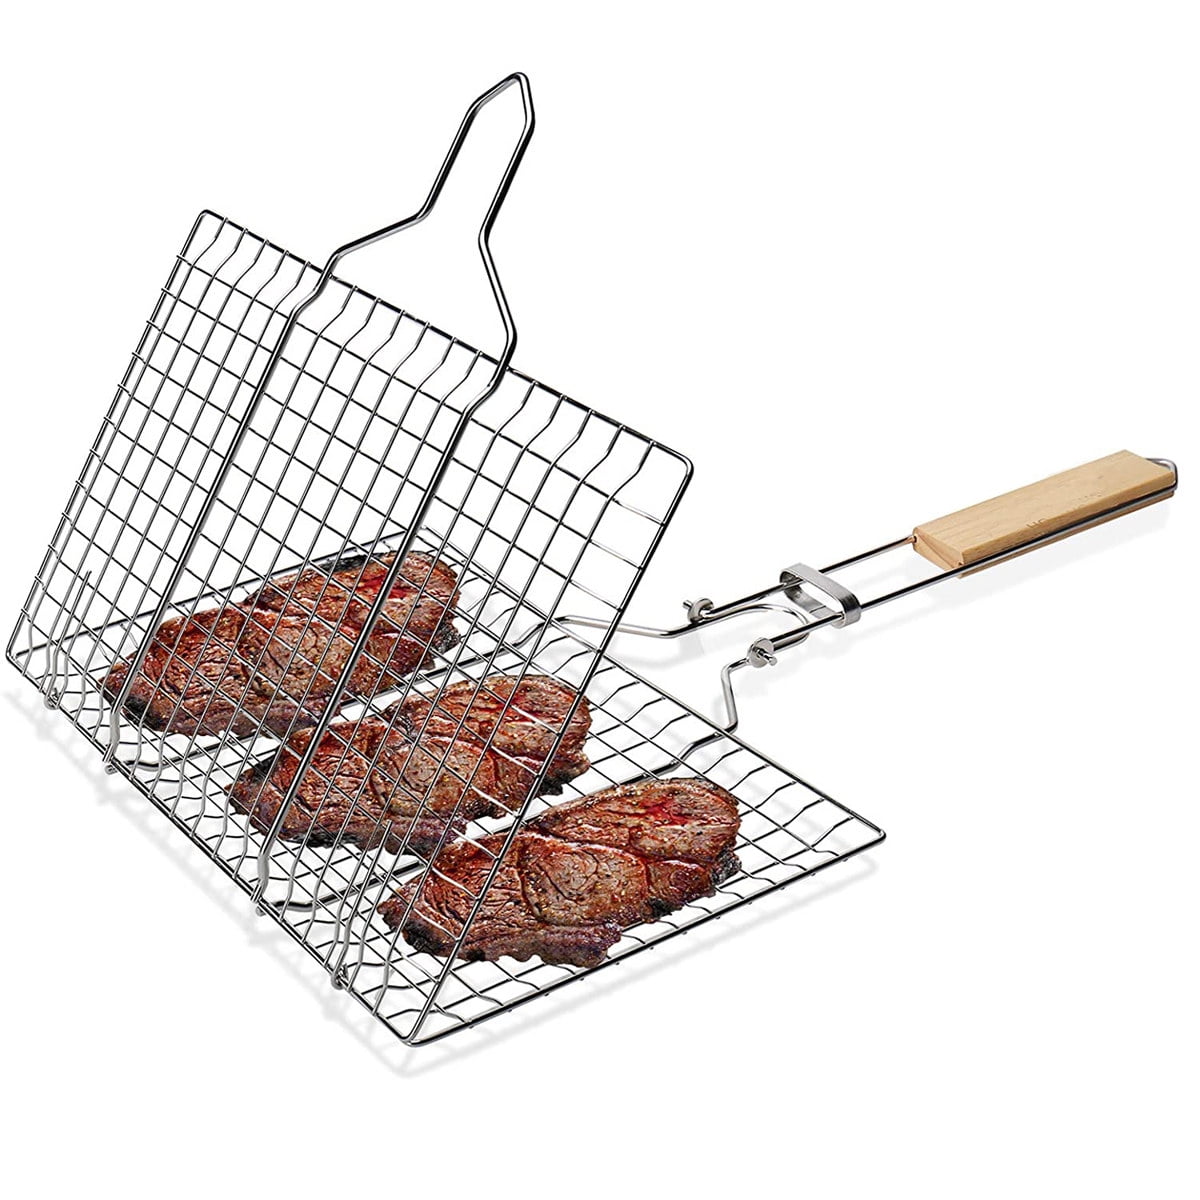 Portable BBQ Grilling Basket Stainless Steel Removable Wooden Grid Gap Heat Grip 